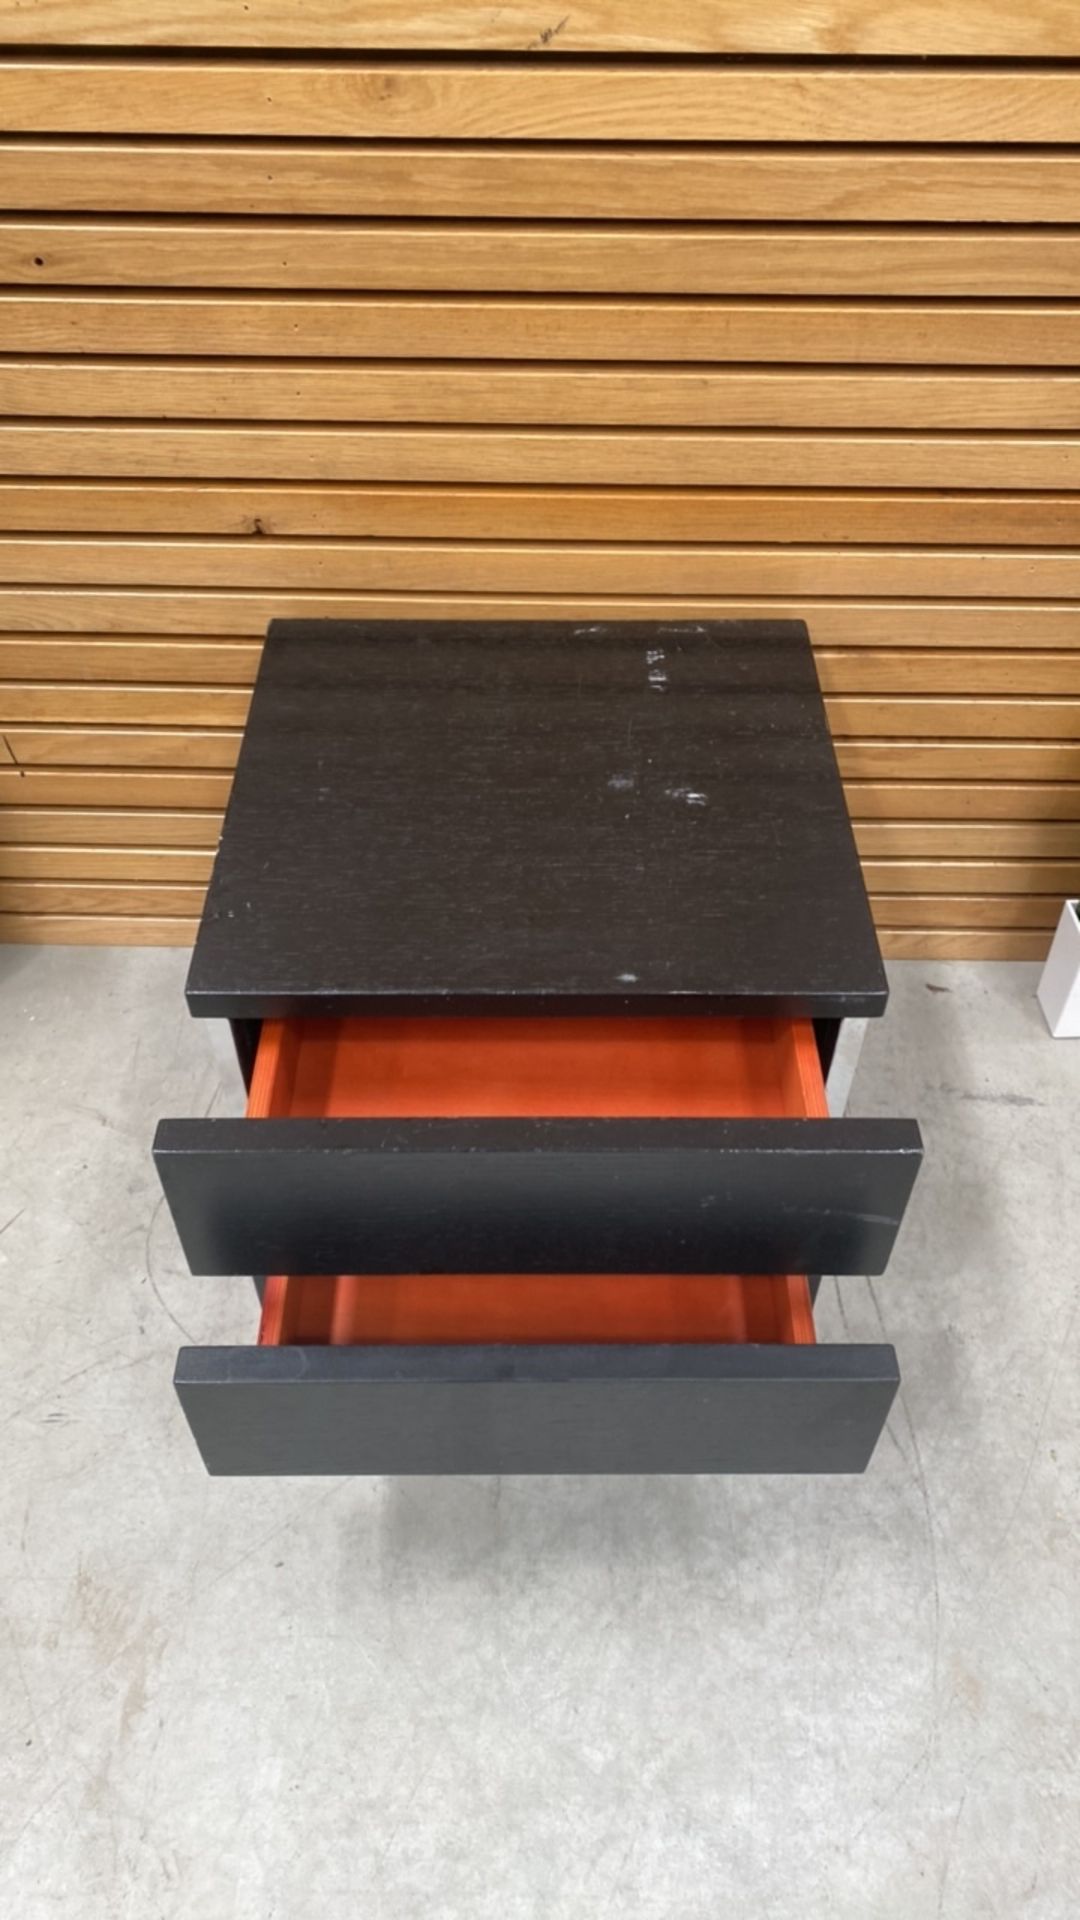 Black Wooden Side Table With 2 Draws - Image 3 of 4